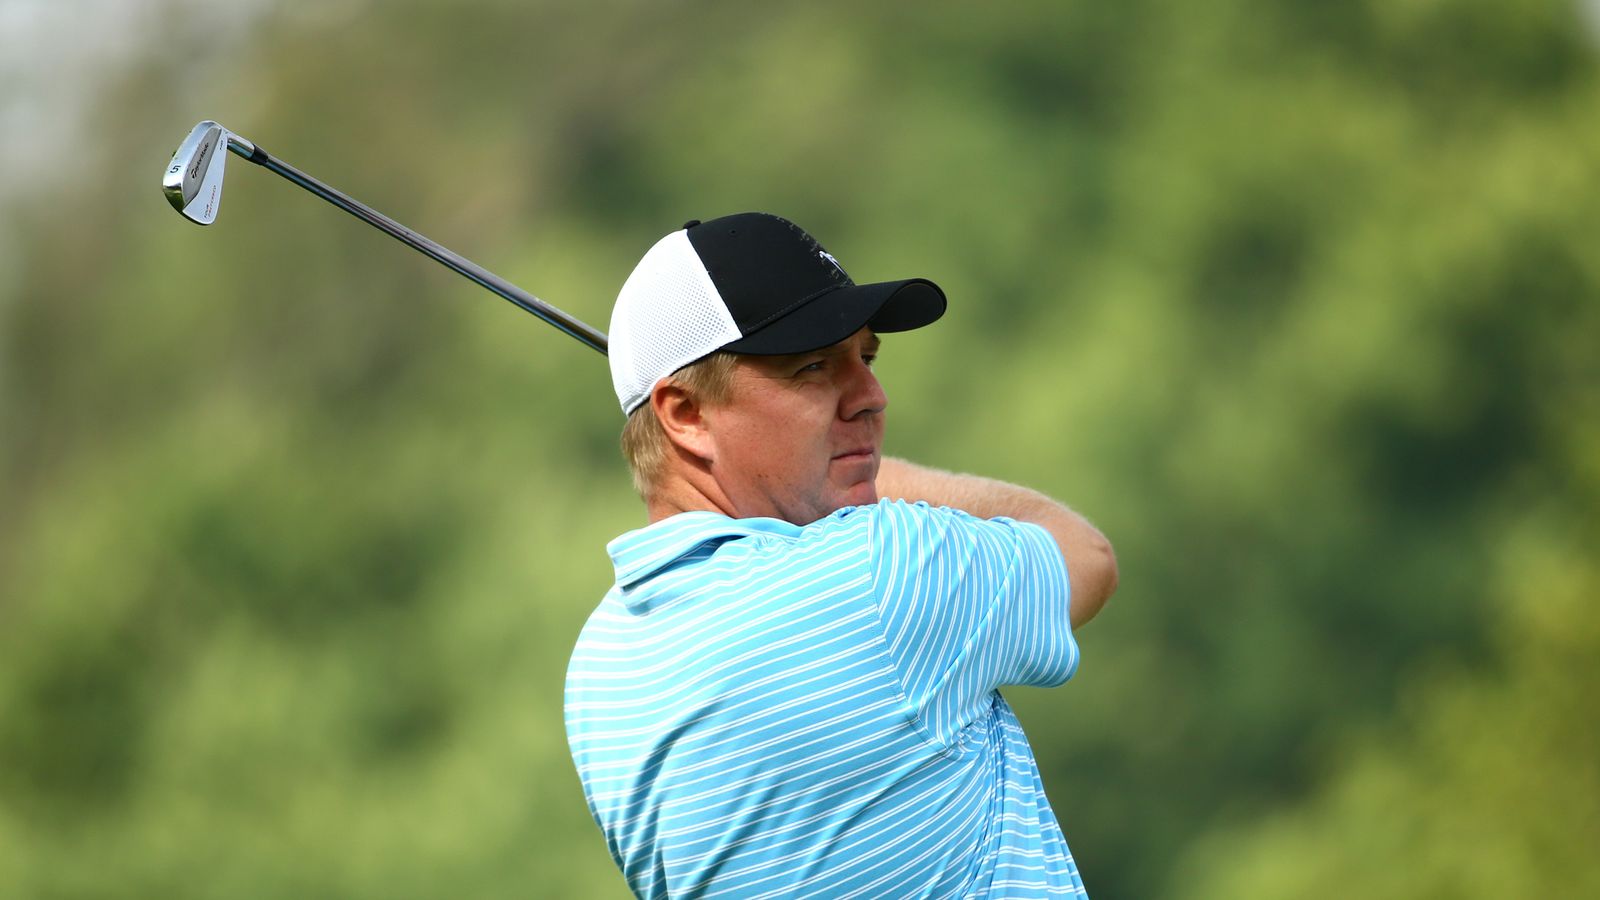 Ross McGowan fires 62 to take three-shot lead at Joburg Open | Golf ...